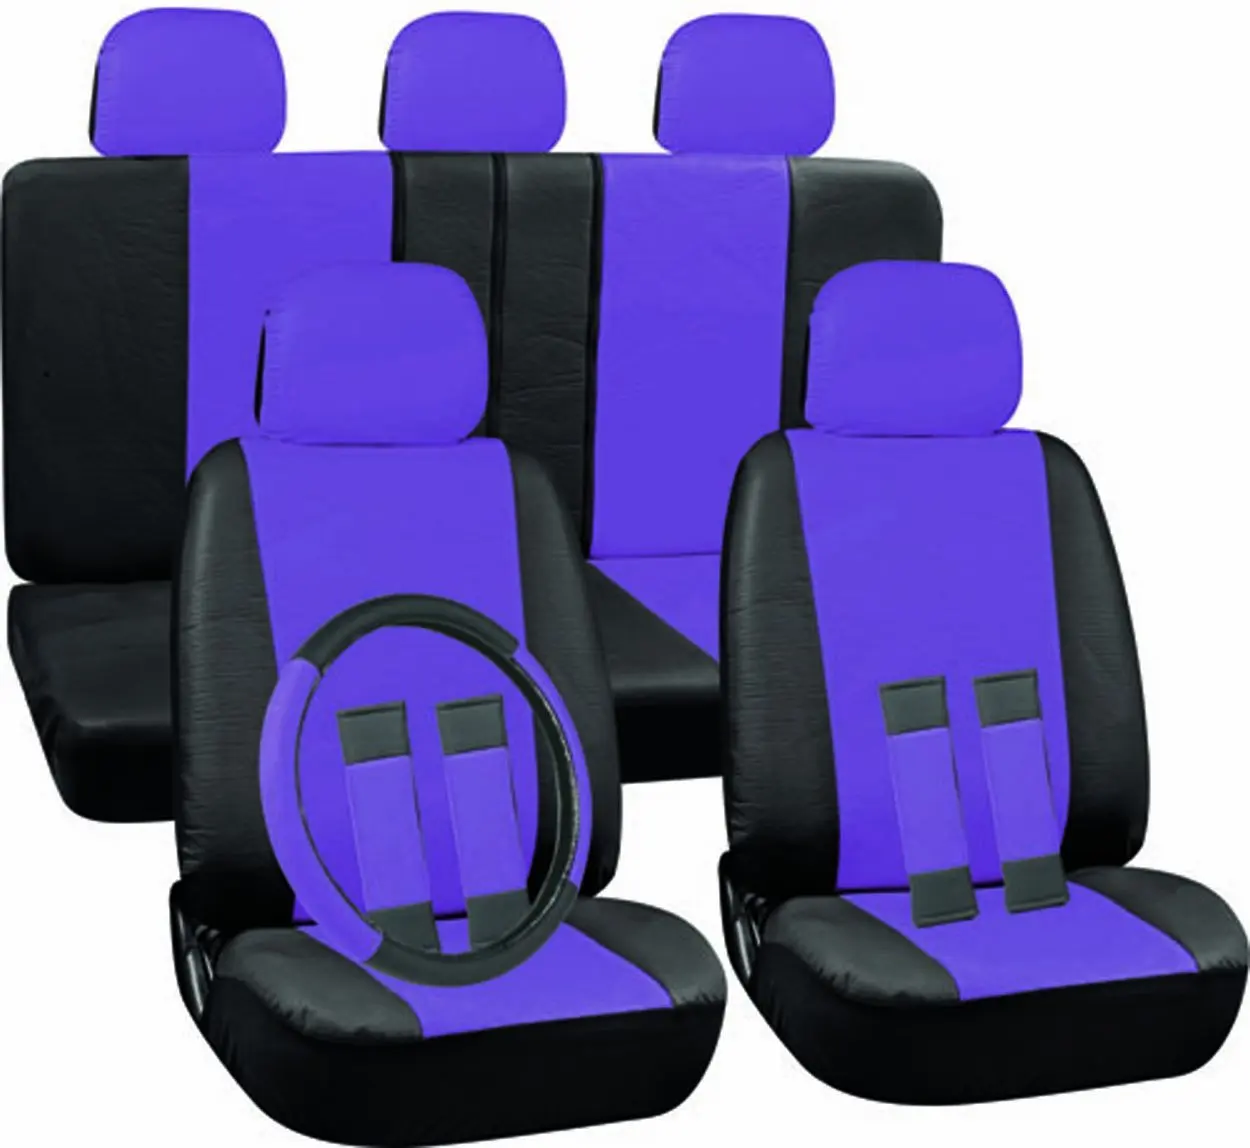 Pu Faux Leather Seat Covers Full 17 Piece Set Purple And Black For Car  Truck Suv Van - Buy Car+seat+covers,Car Seat Covers Pink Plush,Car Seat  Covers Pink Product on 